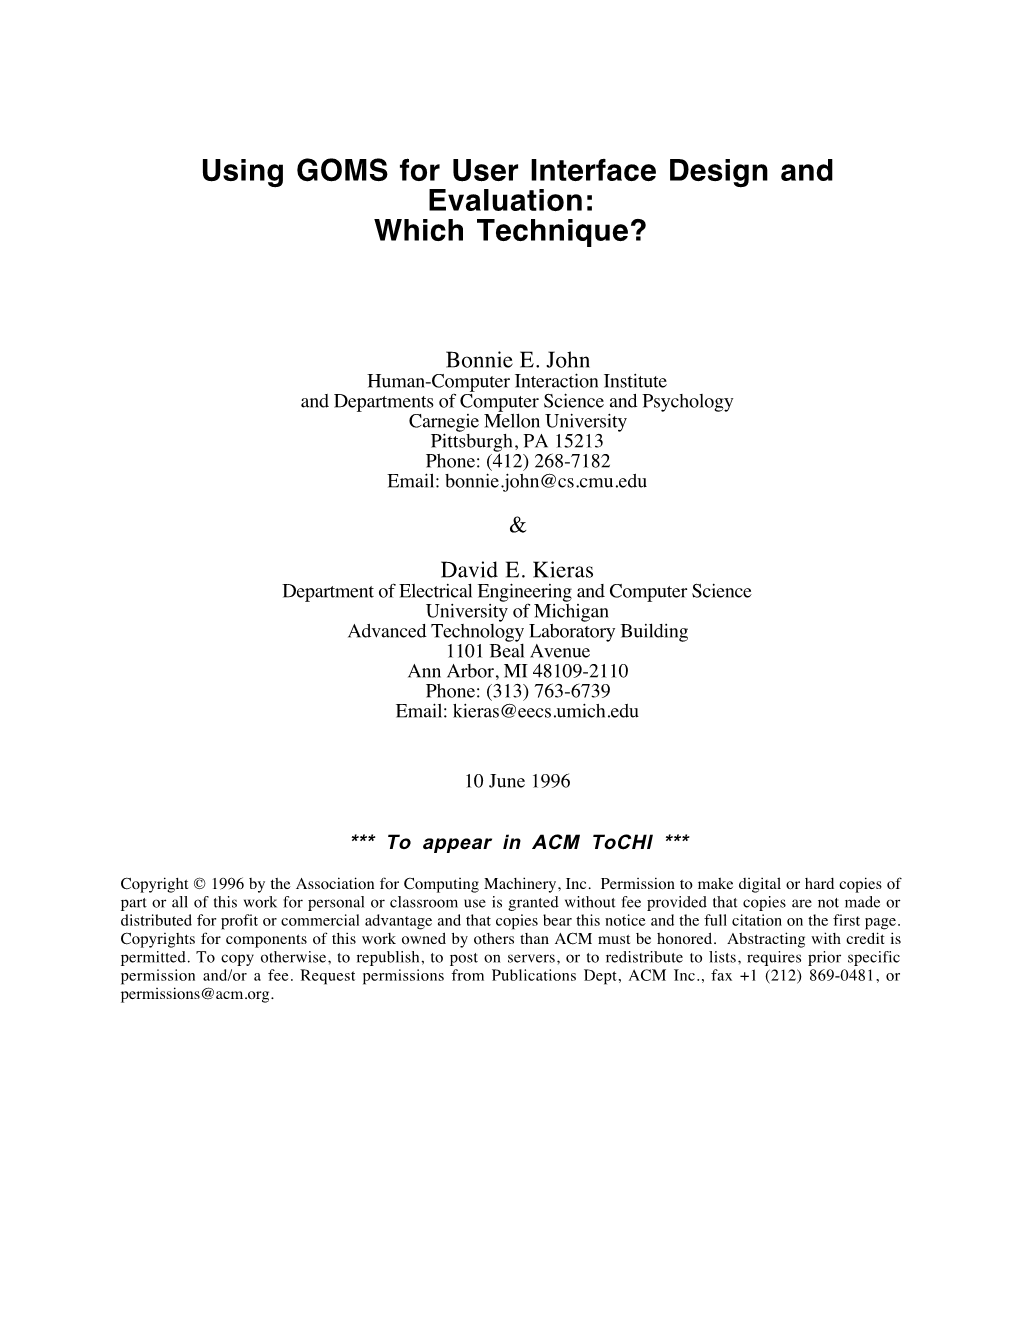 Using GOMS for User Interface Design and Evaluation: Which Technique?